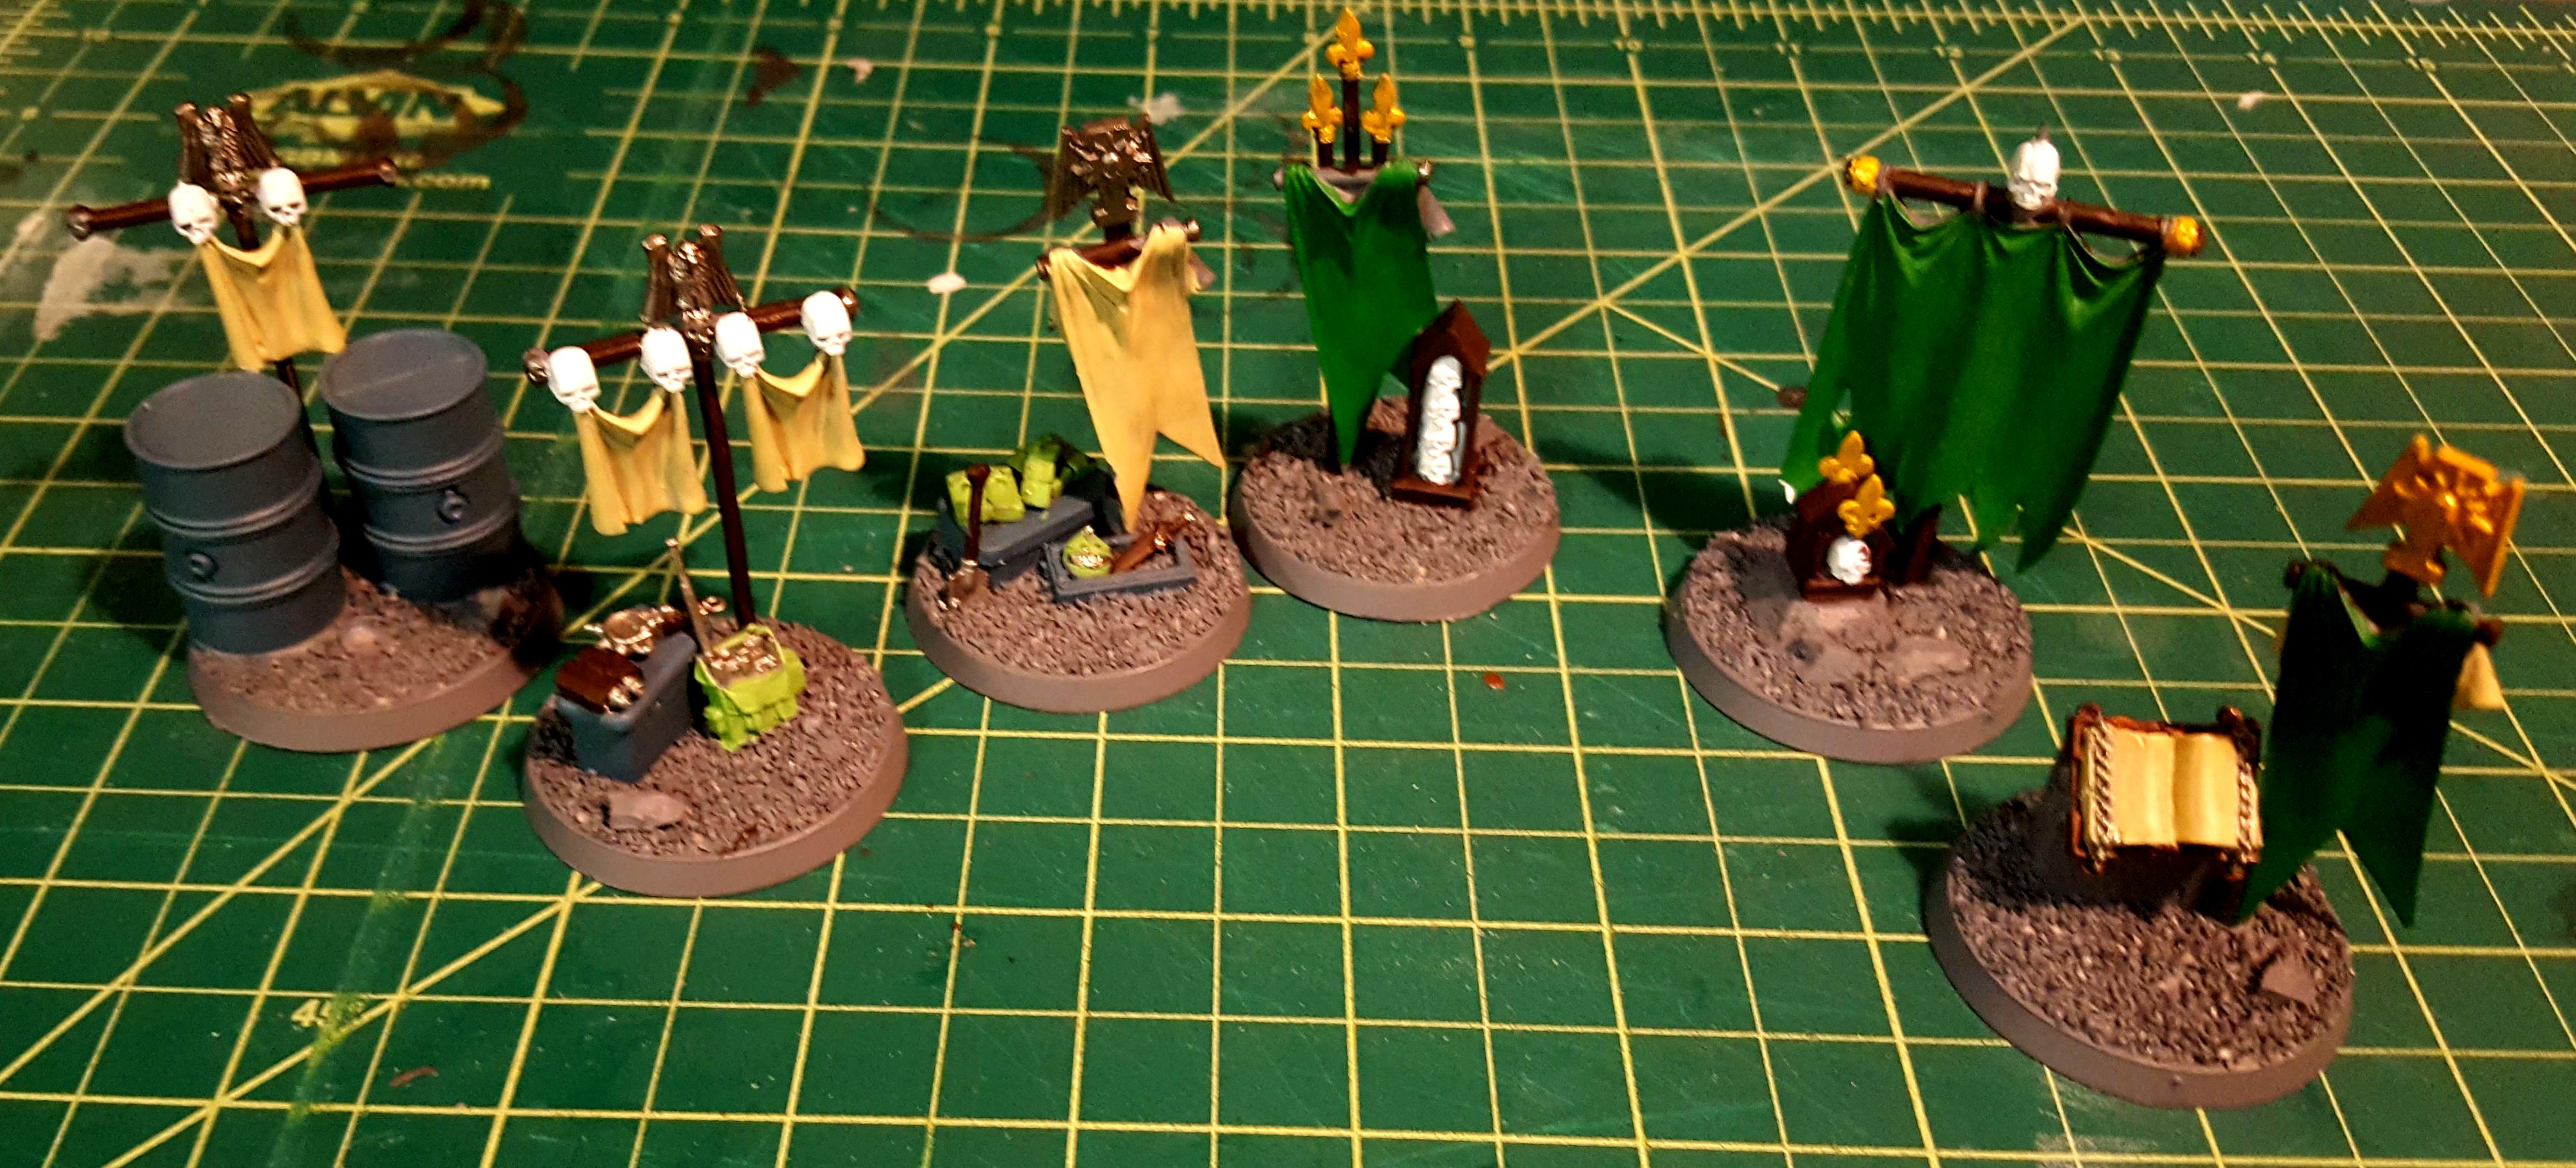 Objective markers, base colors applied